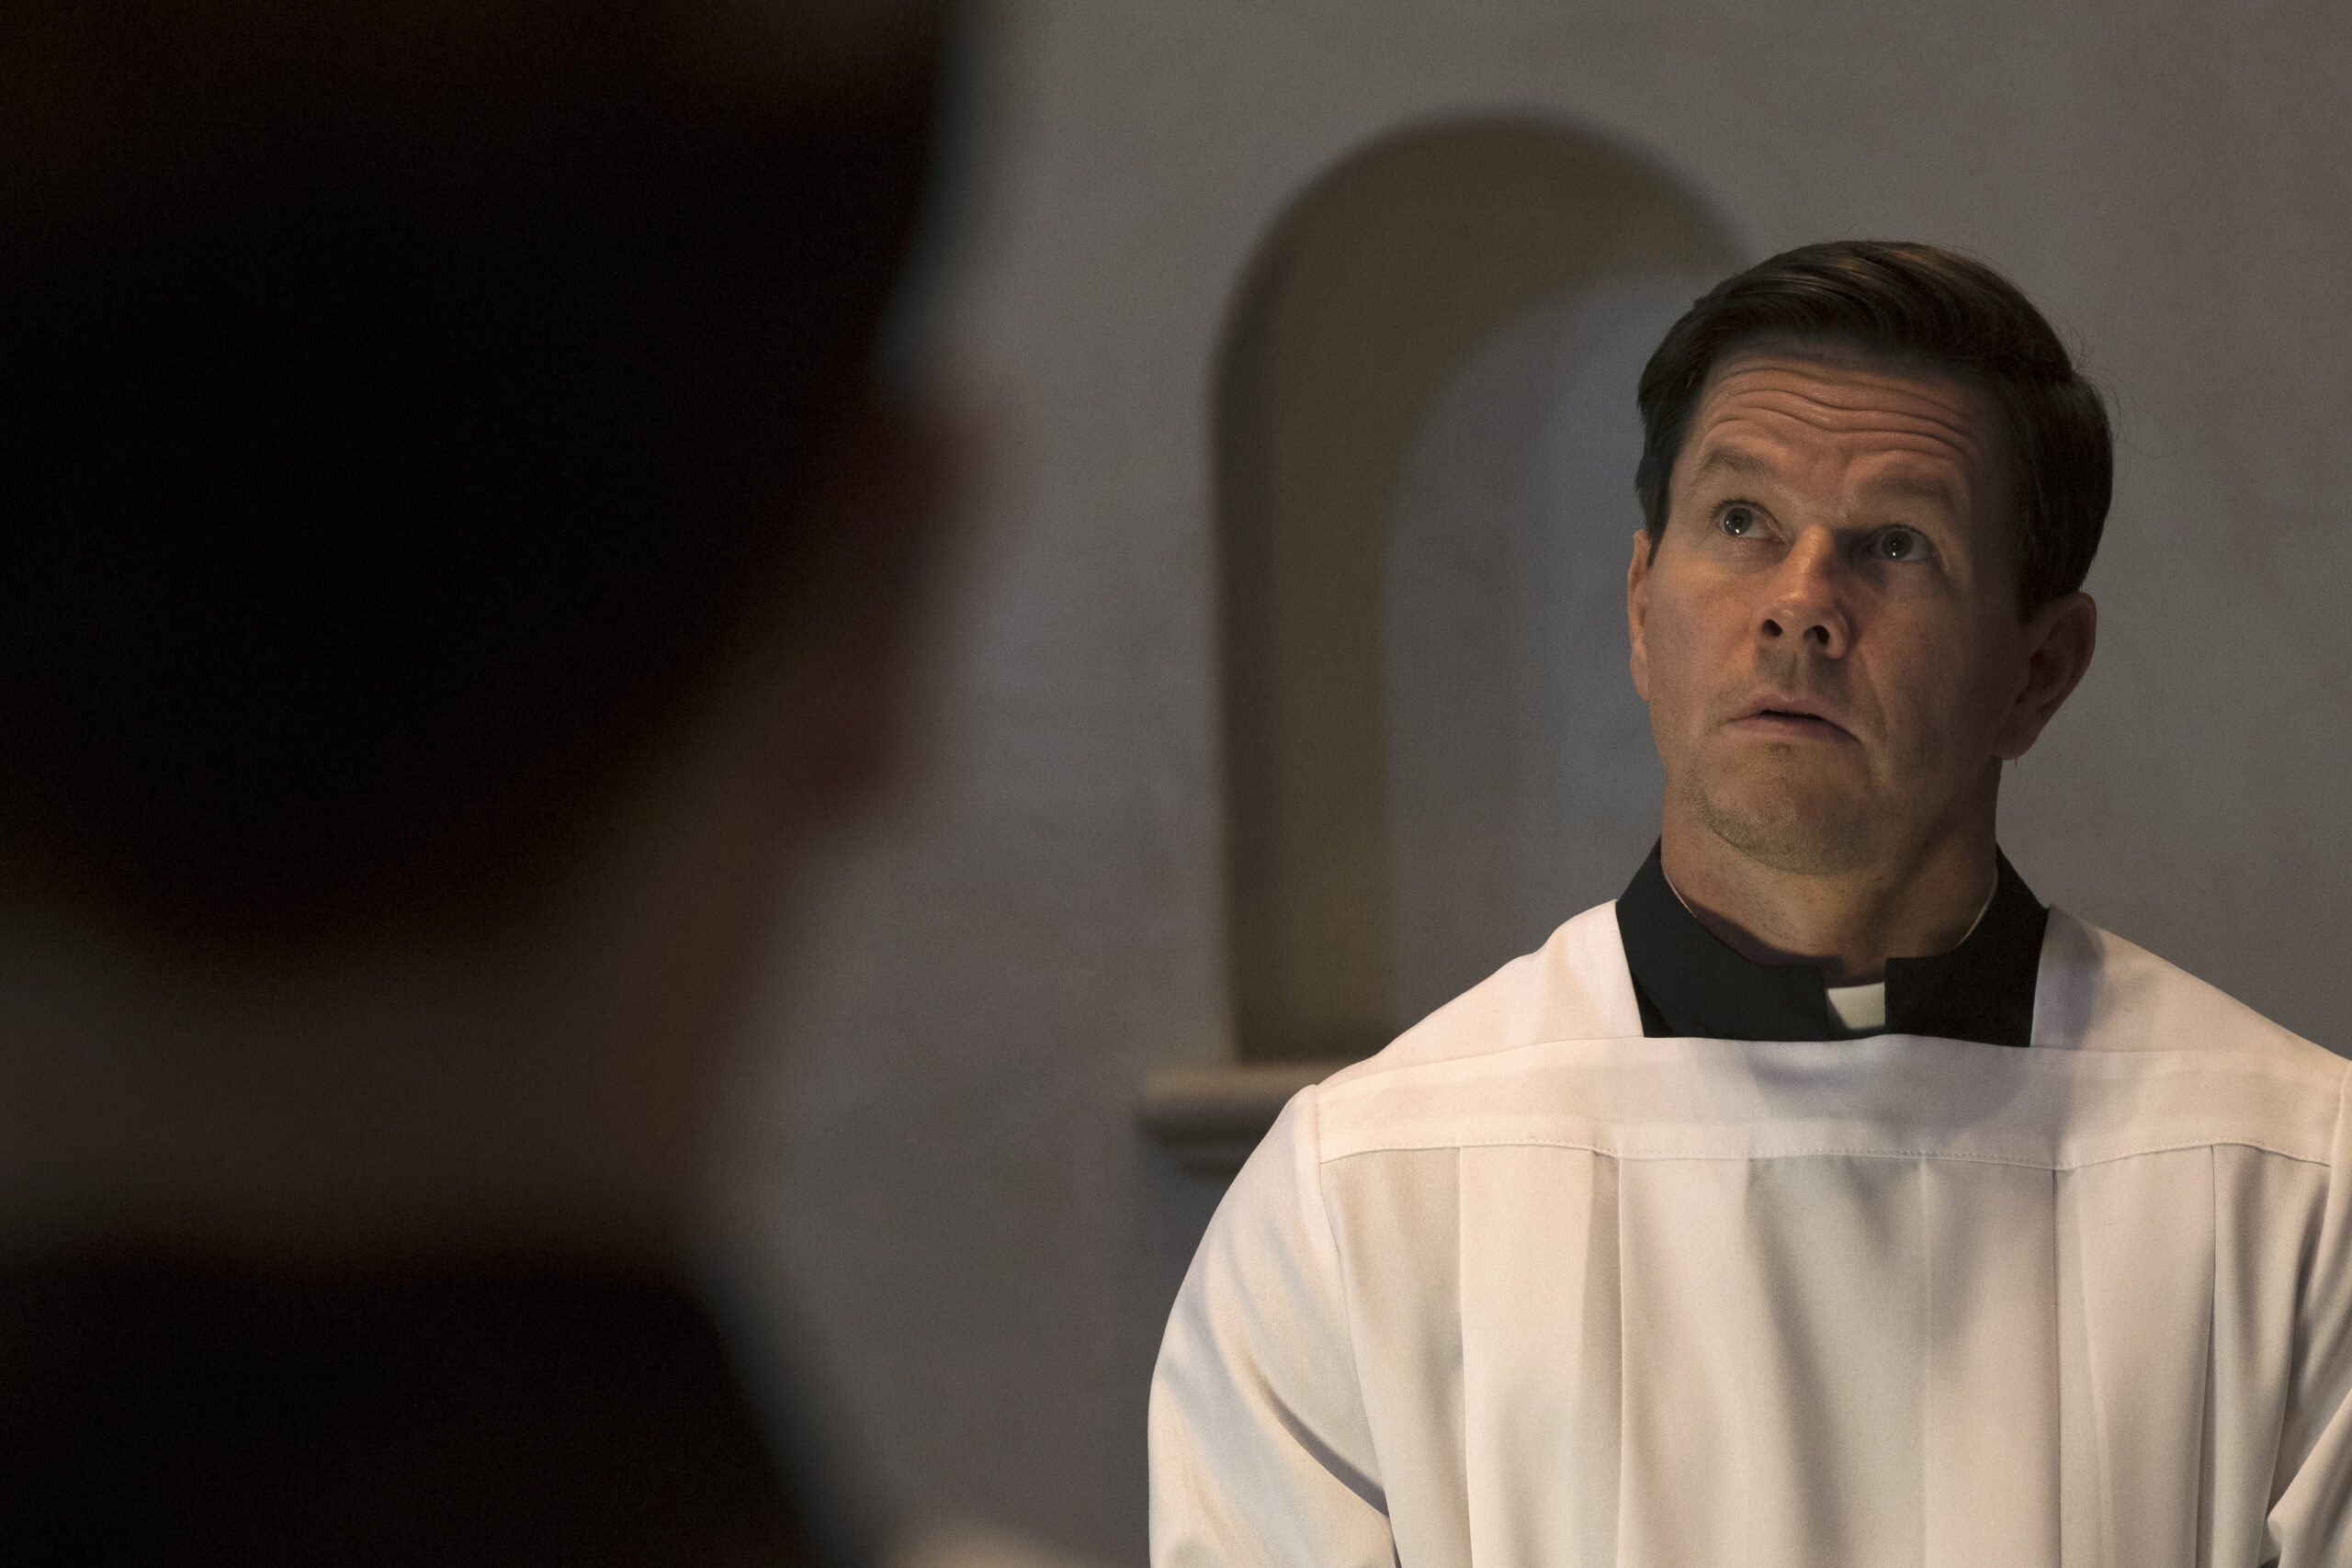 christian movie review of father stu